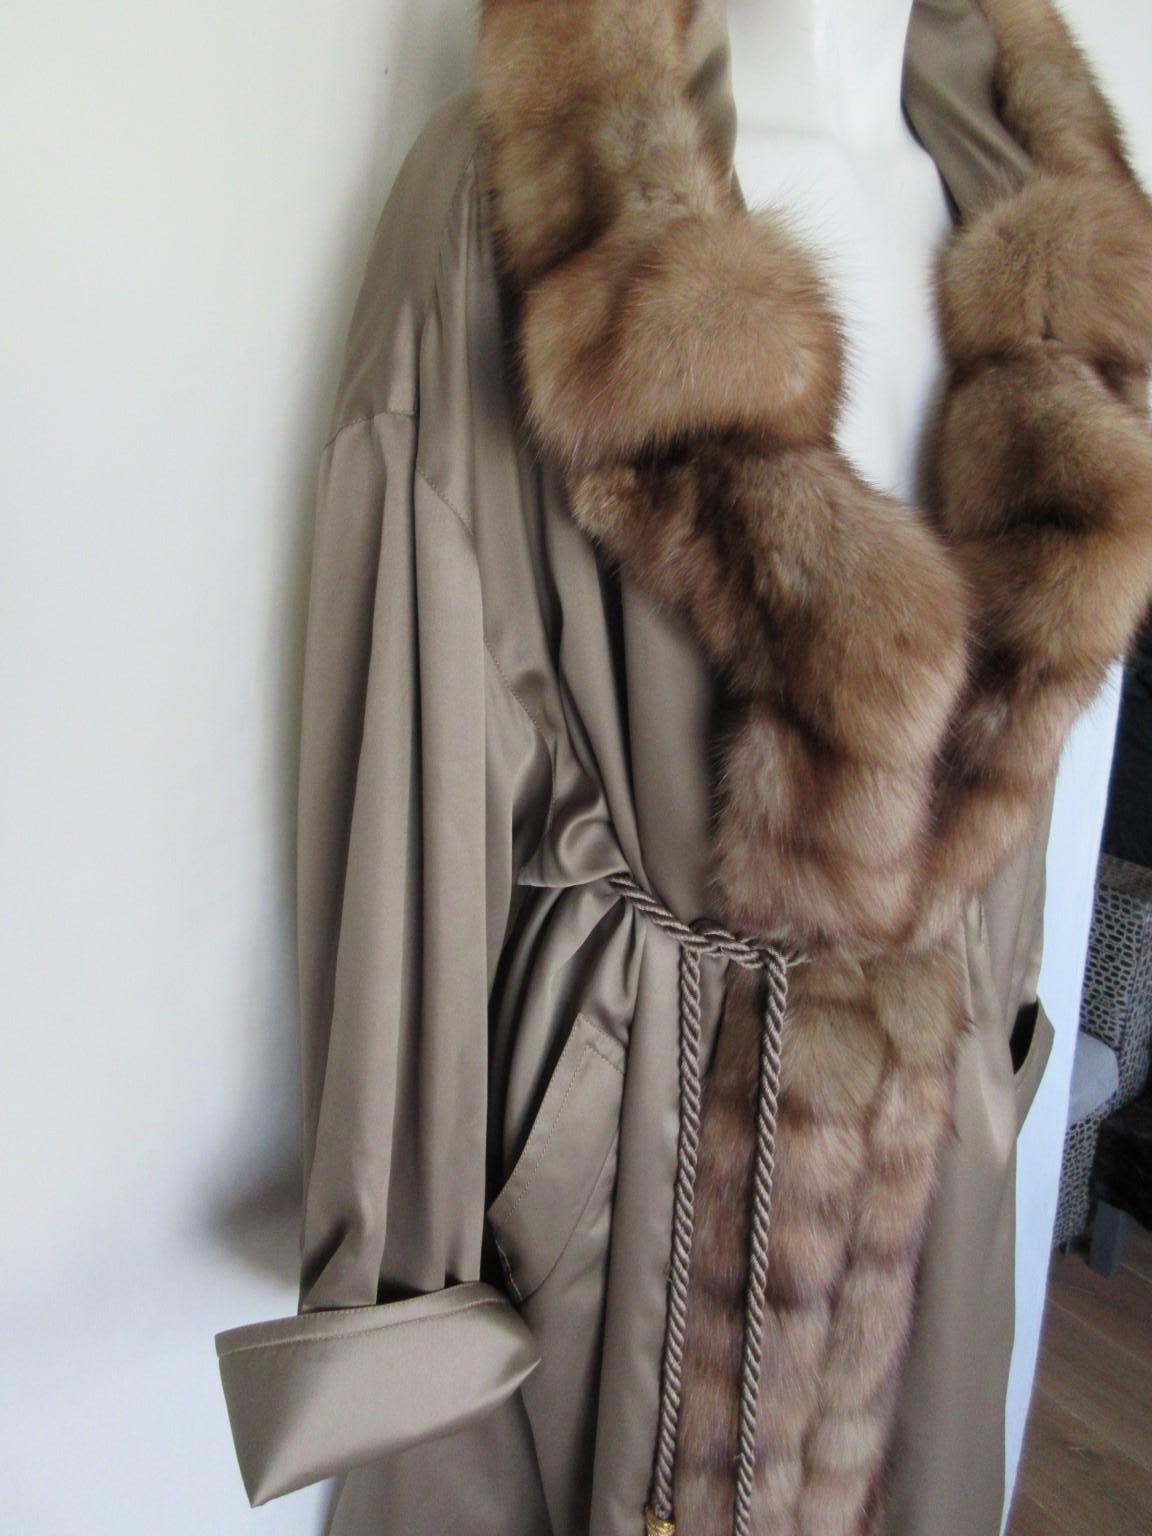 Rare Christian Dior Paris vintage coat with golden sable fur 
Collectors item

We offer more exclusive fur items, view our frontstore.

Details:
Trimmed with quality soft golden sable fur
and made from greenish shiny satin fabric
Its easy and light